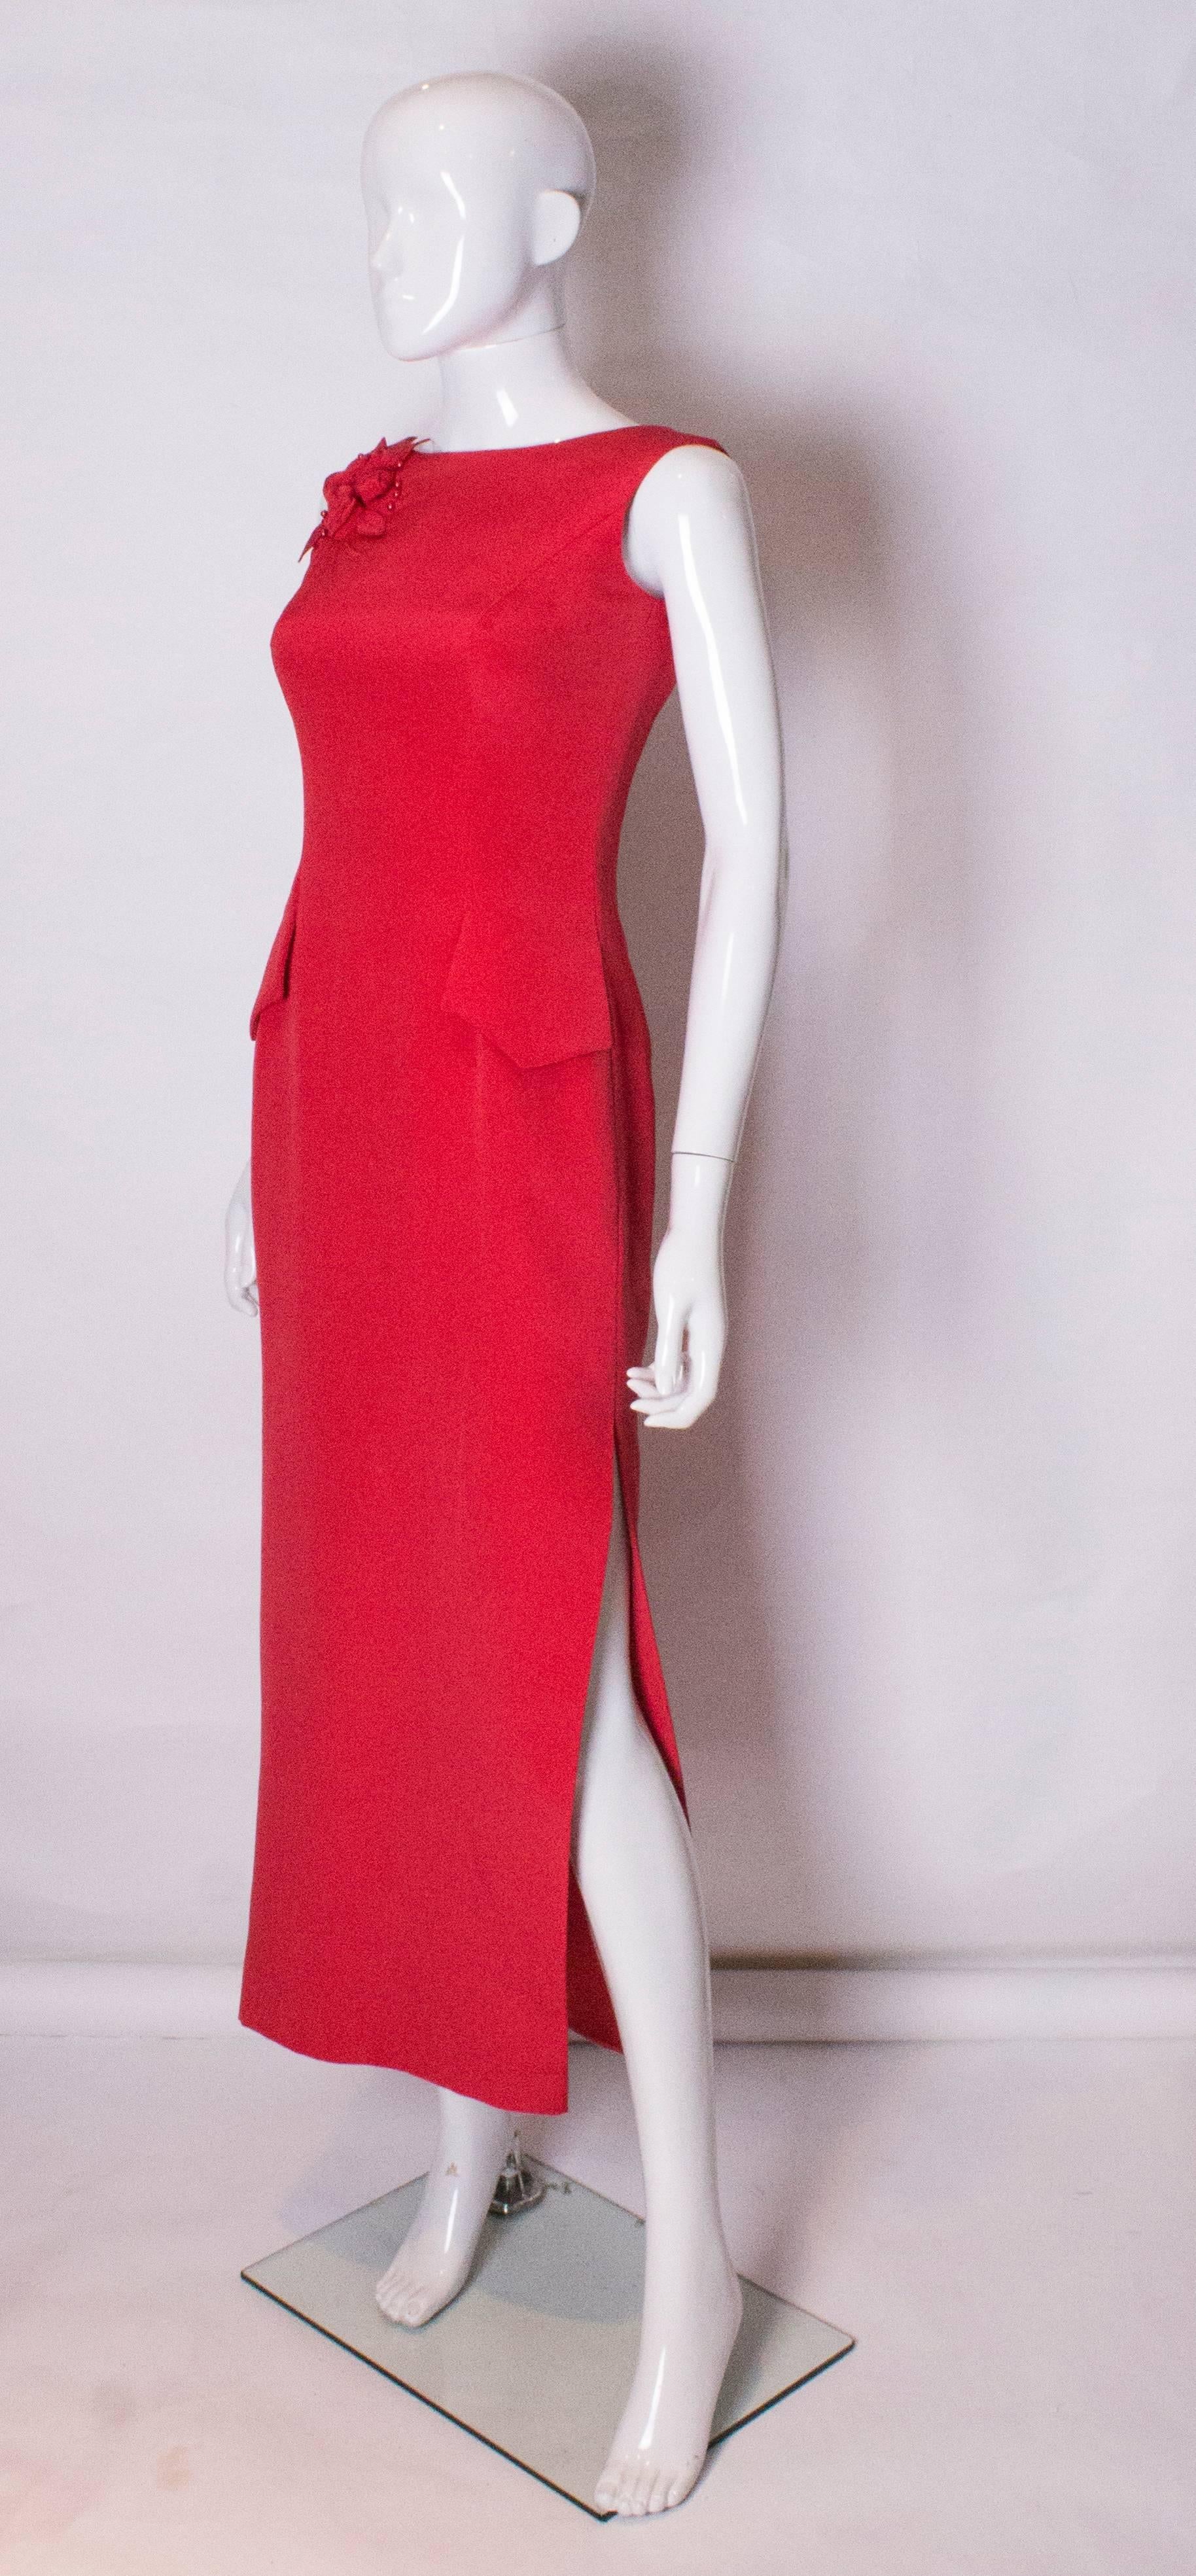 A stunning evening gown by British designer Tomasz Starzewski,  The dress has a slash neckline at the front and a deep v neckline at the back with a central back zip.It has a red floral and bead decoration on the right shoulder, a slit on the left